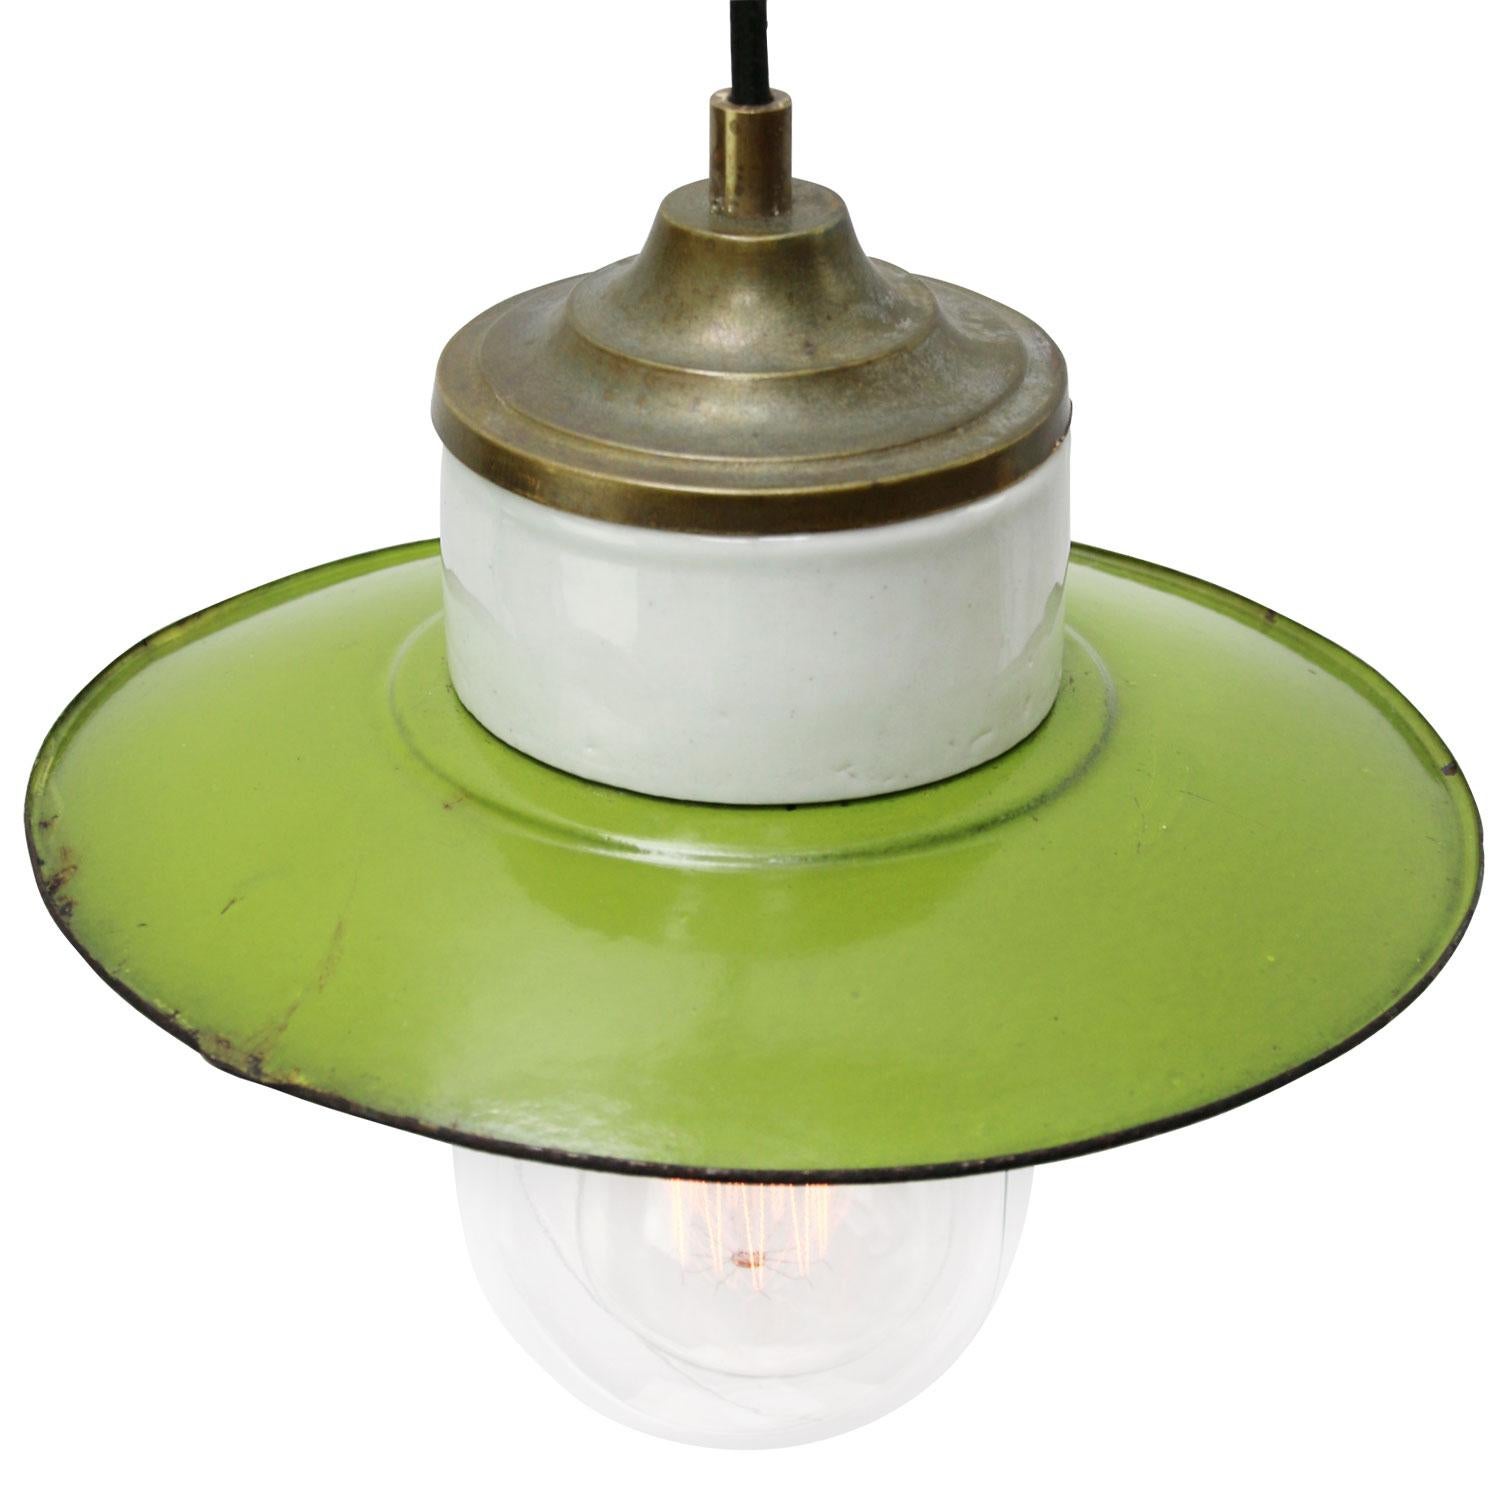 Porcelain Industrial hanging lamp.
Green porcelain, brass and clear glass.
Enamel shade
2 conductors, no ground.

Weight: 1.40 kg / 3.1 lb

Priced per individual item. All lamps have been made suitable by international standards for incandescent